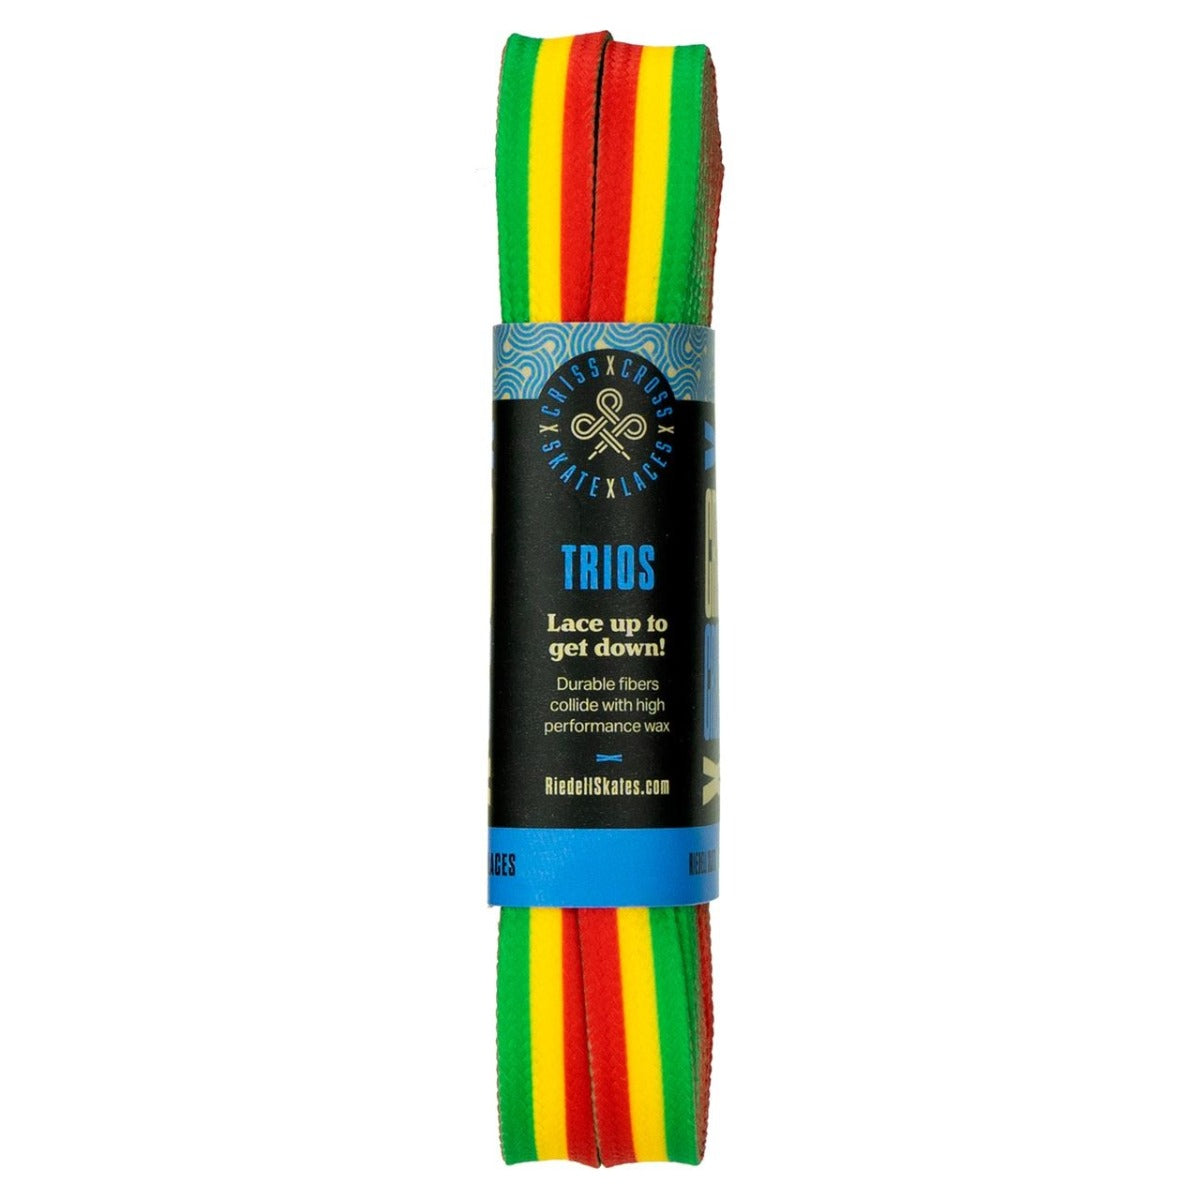 Criss Cross Trio Laces - Green/Red/Yellow